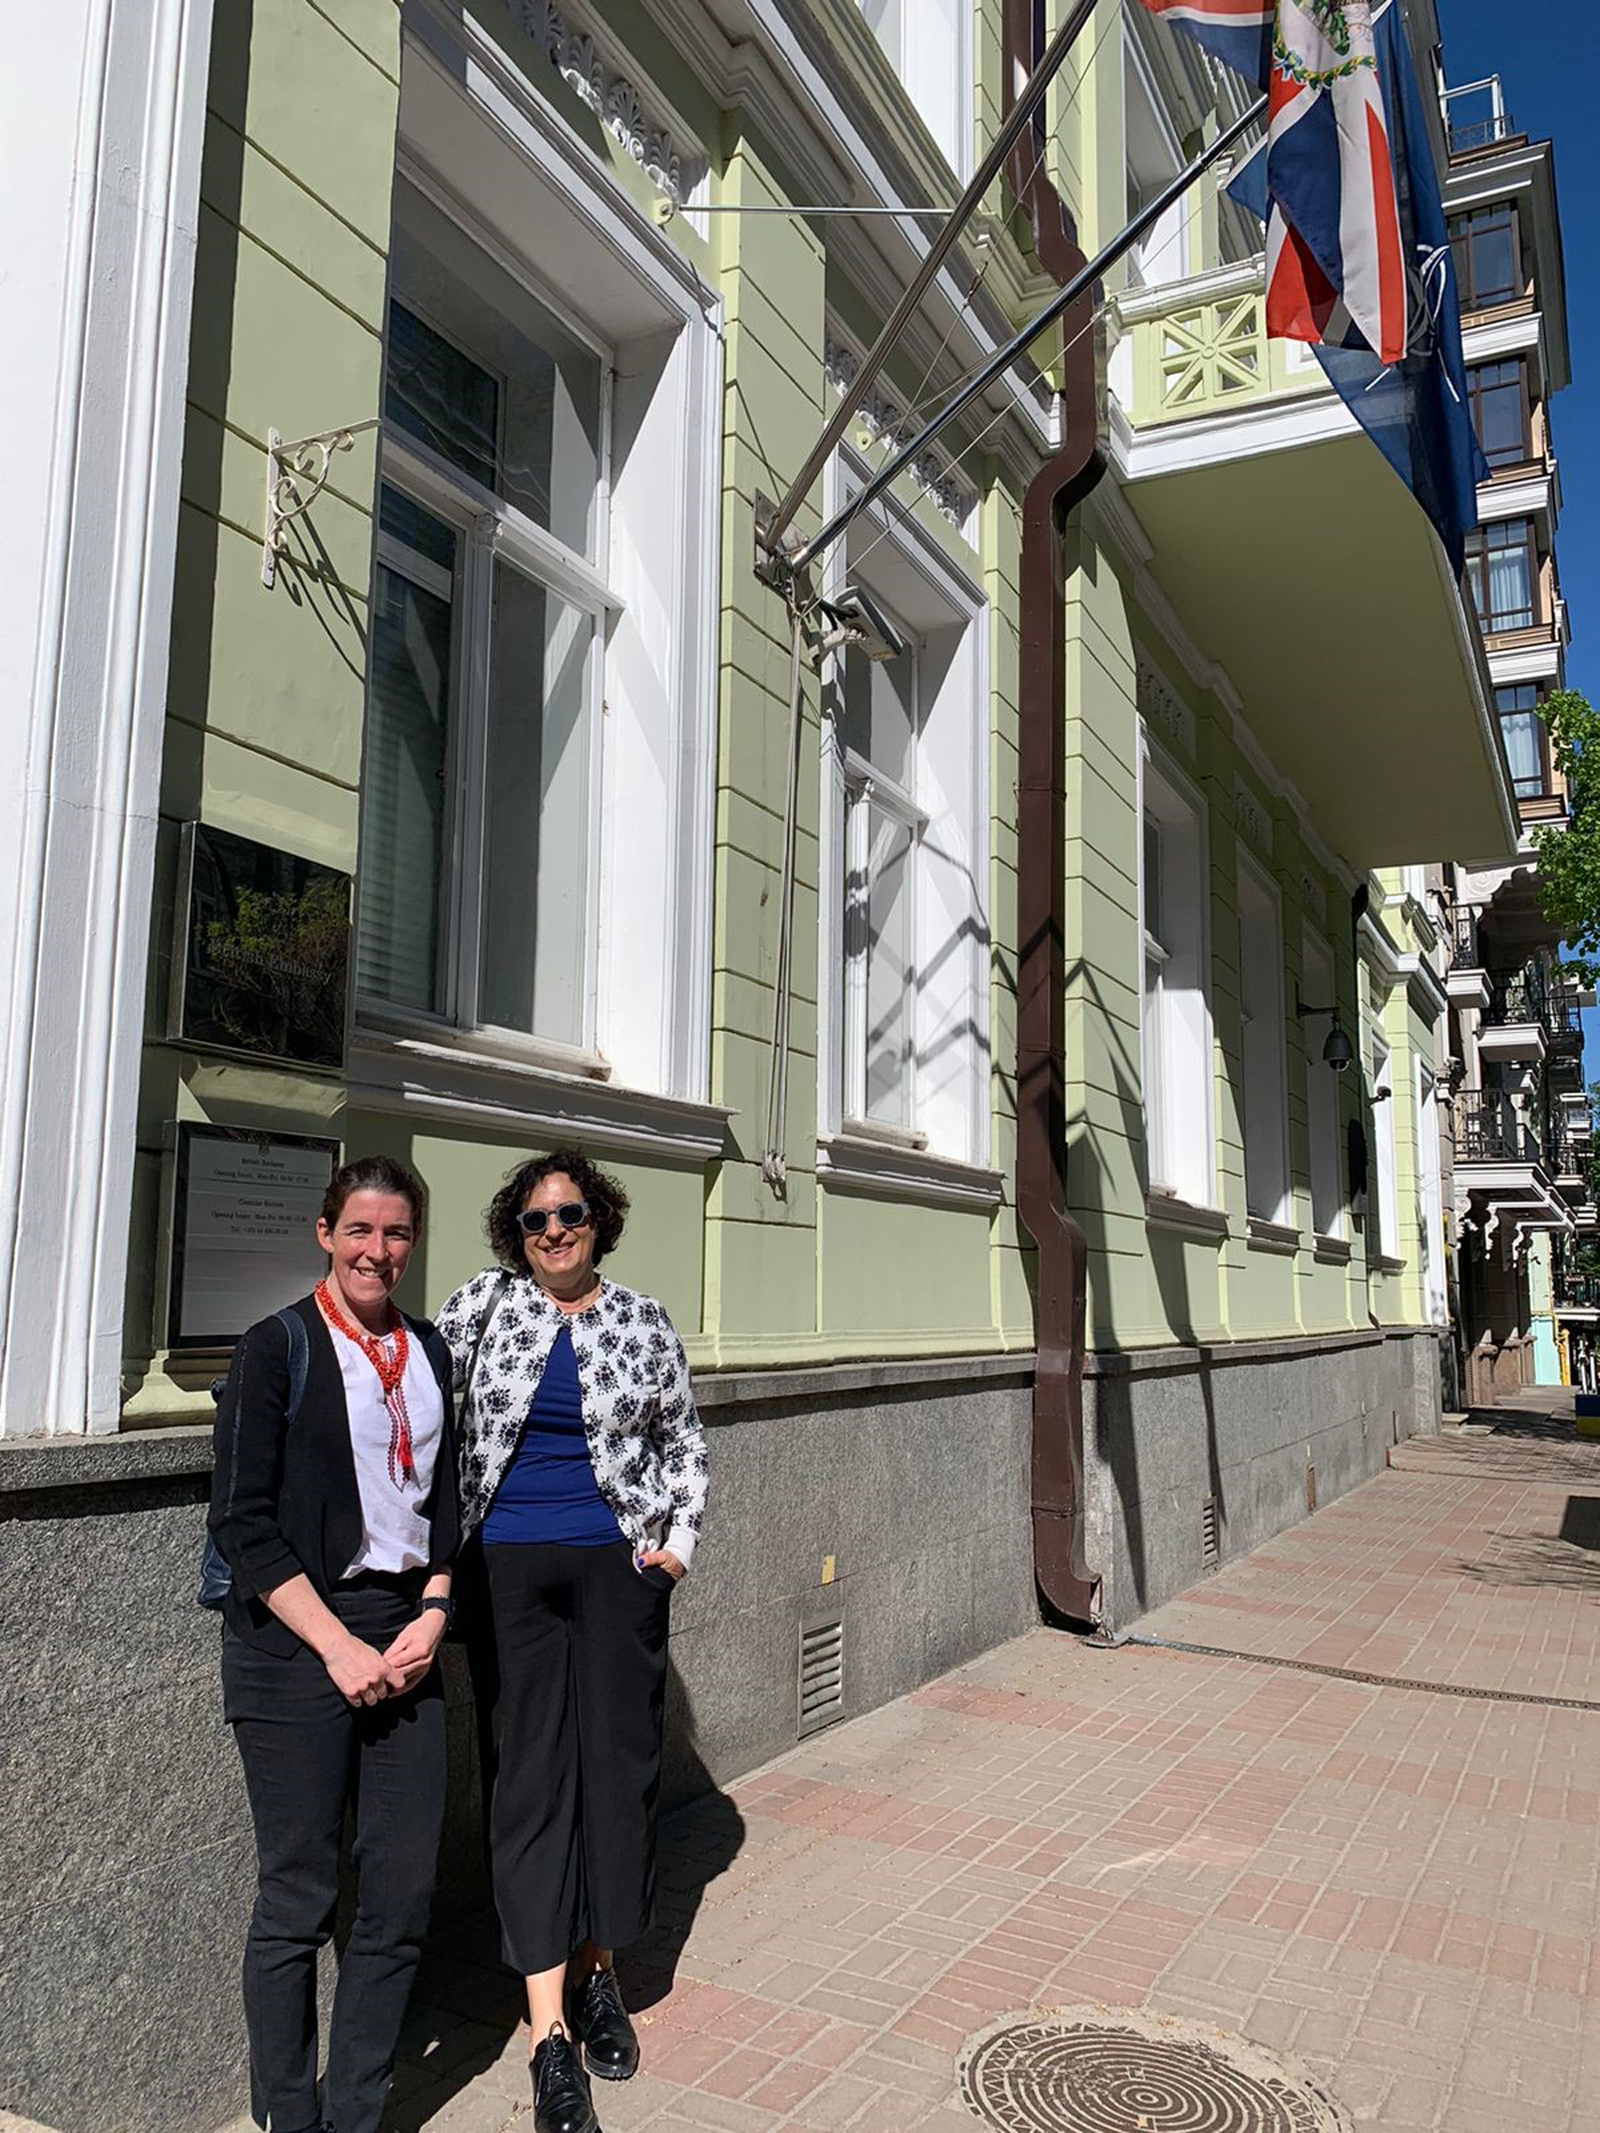 Welsh diplomat Kate Davenport (left) with the British Ambassador to Ukraine Melinda Simmons outside the British Embassy in Kyiv (Foreign, Commonwealth and Development Office/PA)